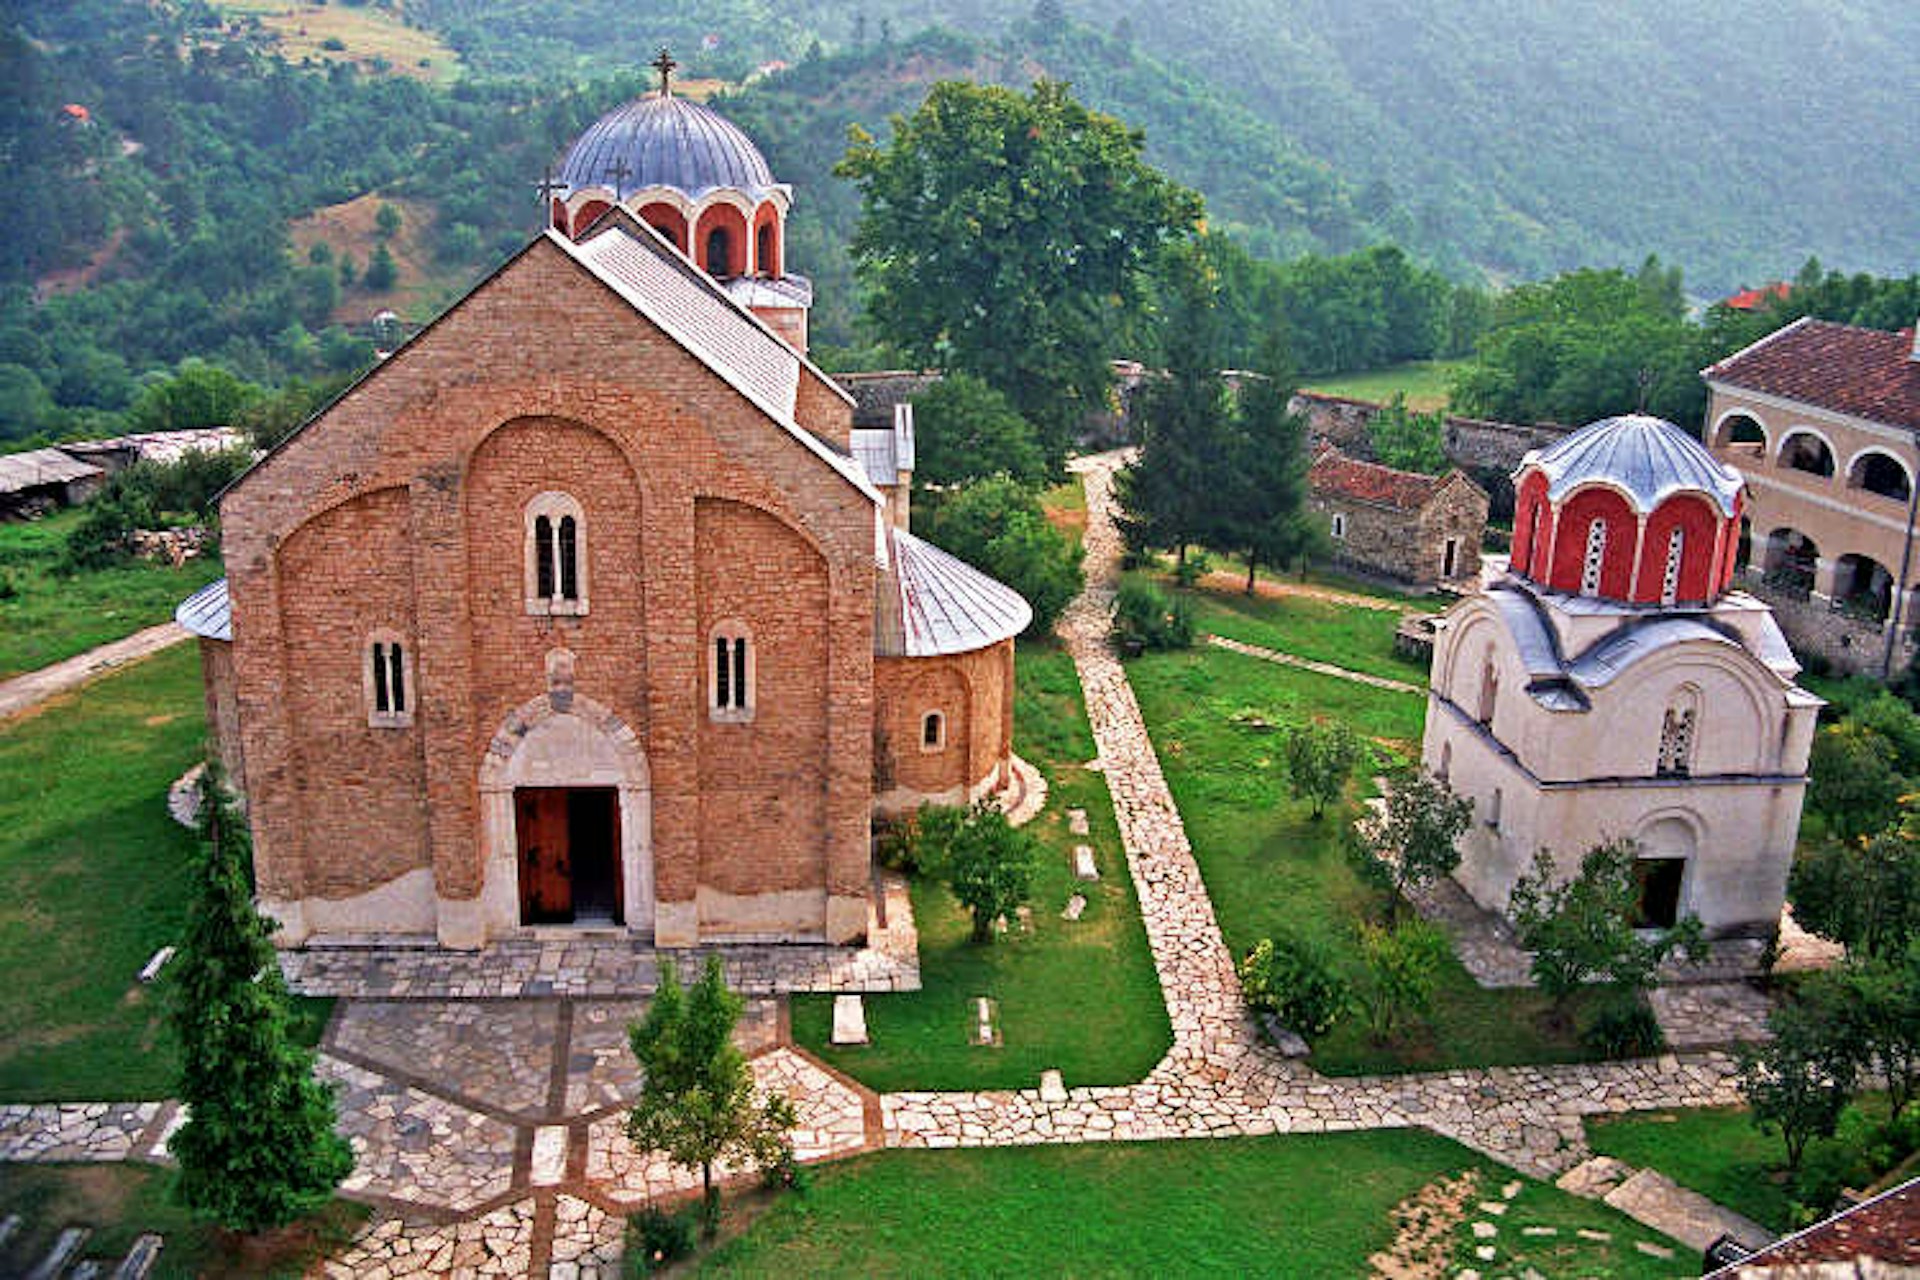 Unesco-listed Studenica monastery, built in 1190s. Image by Dragan Bosnic / Courtesy of National Tourism Organisation of Serbia